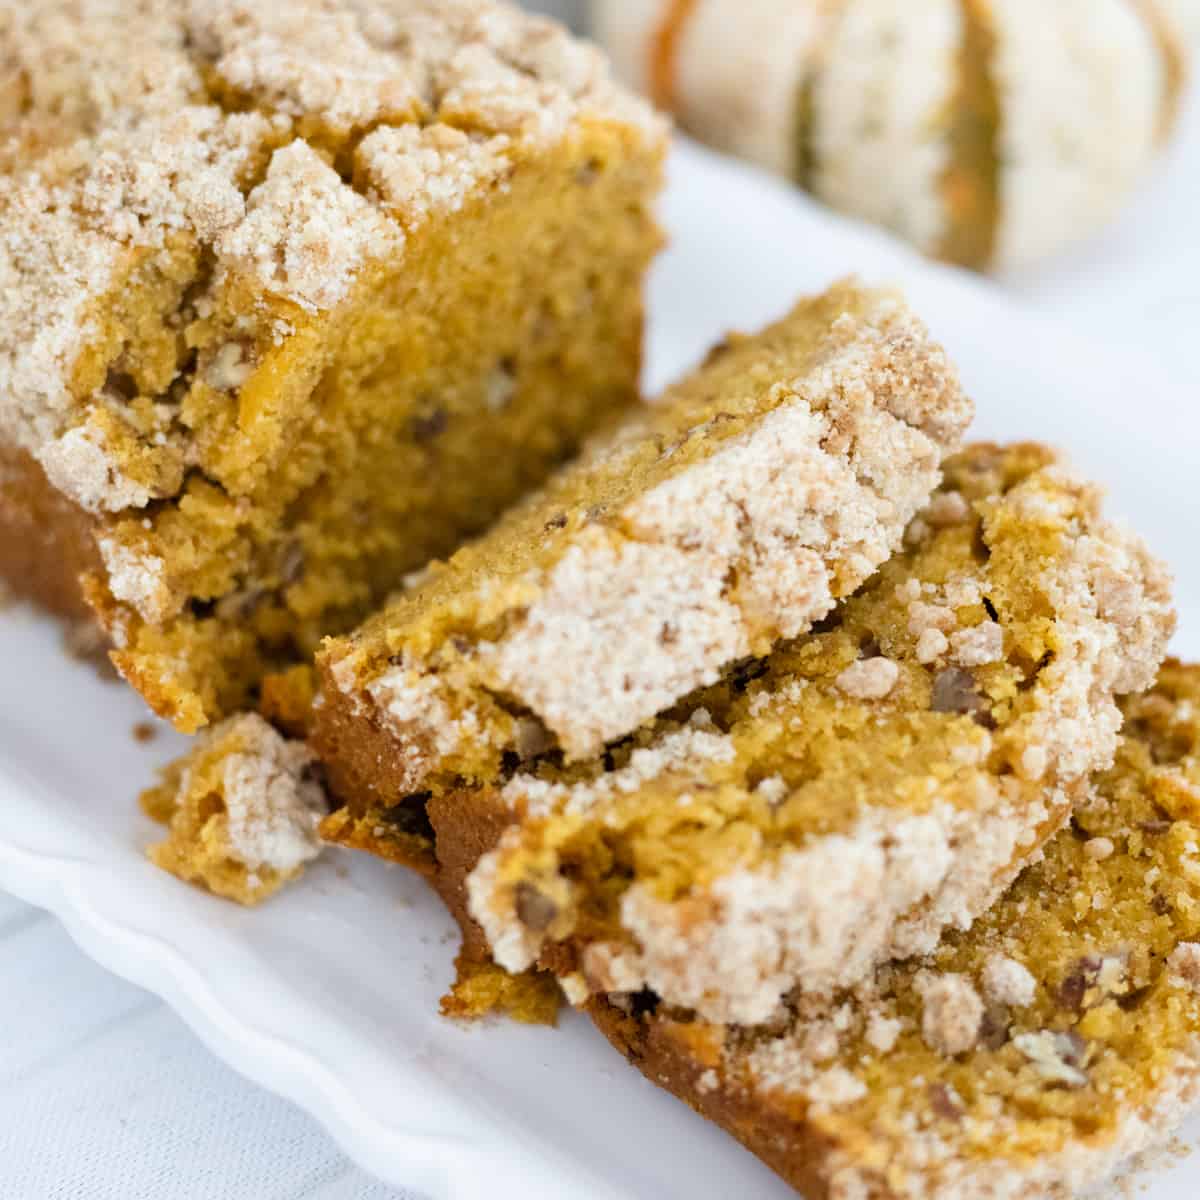 Pumpkin bread with streusel topping sliced on a serving platter.